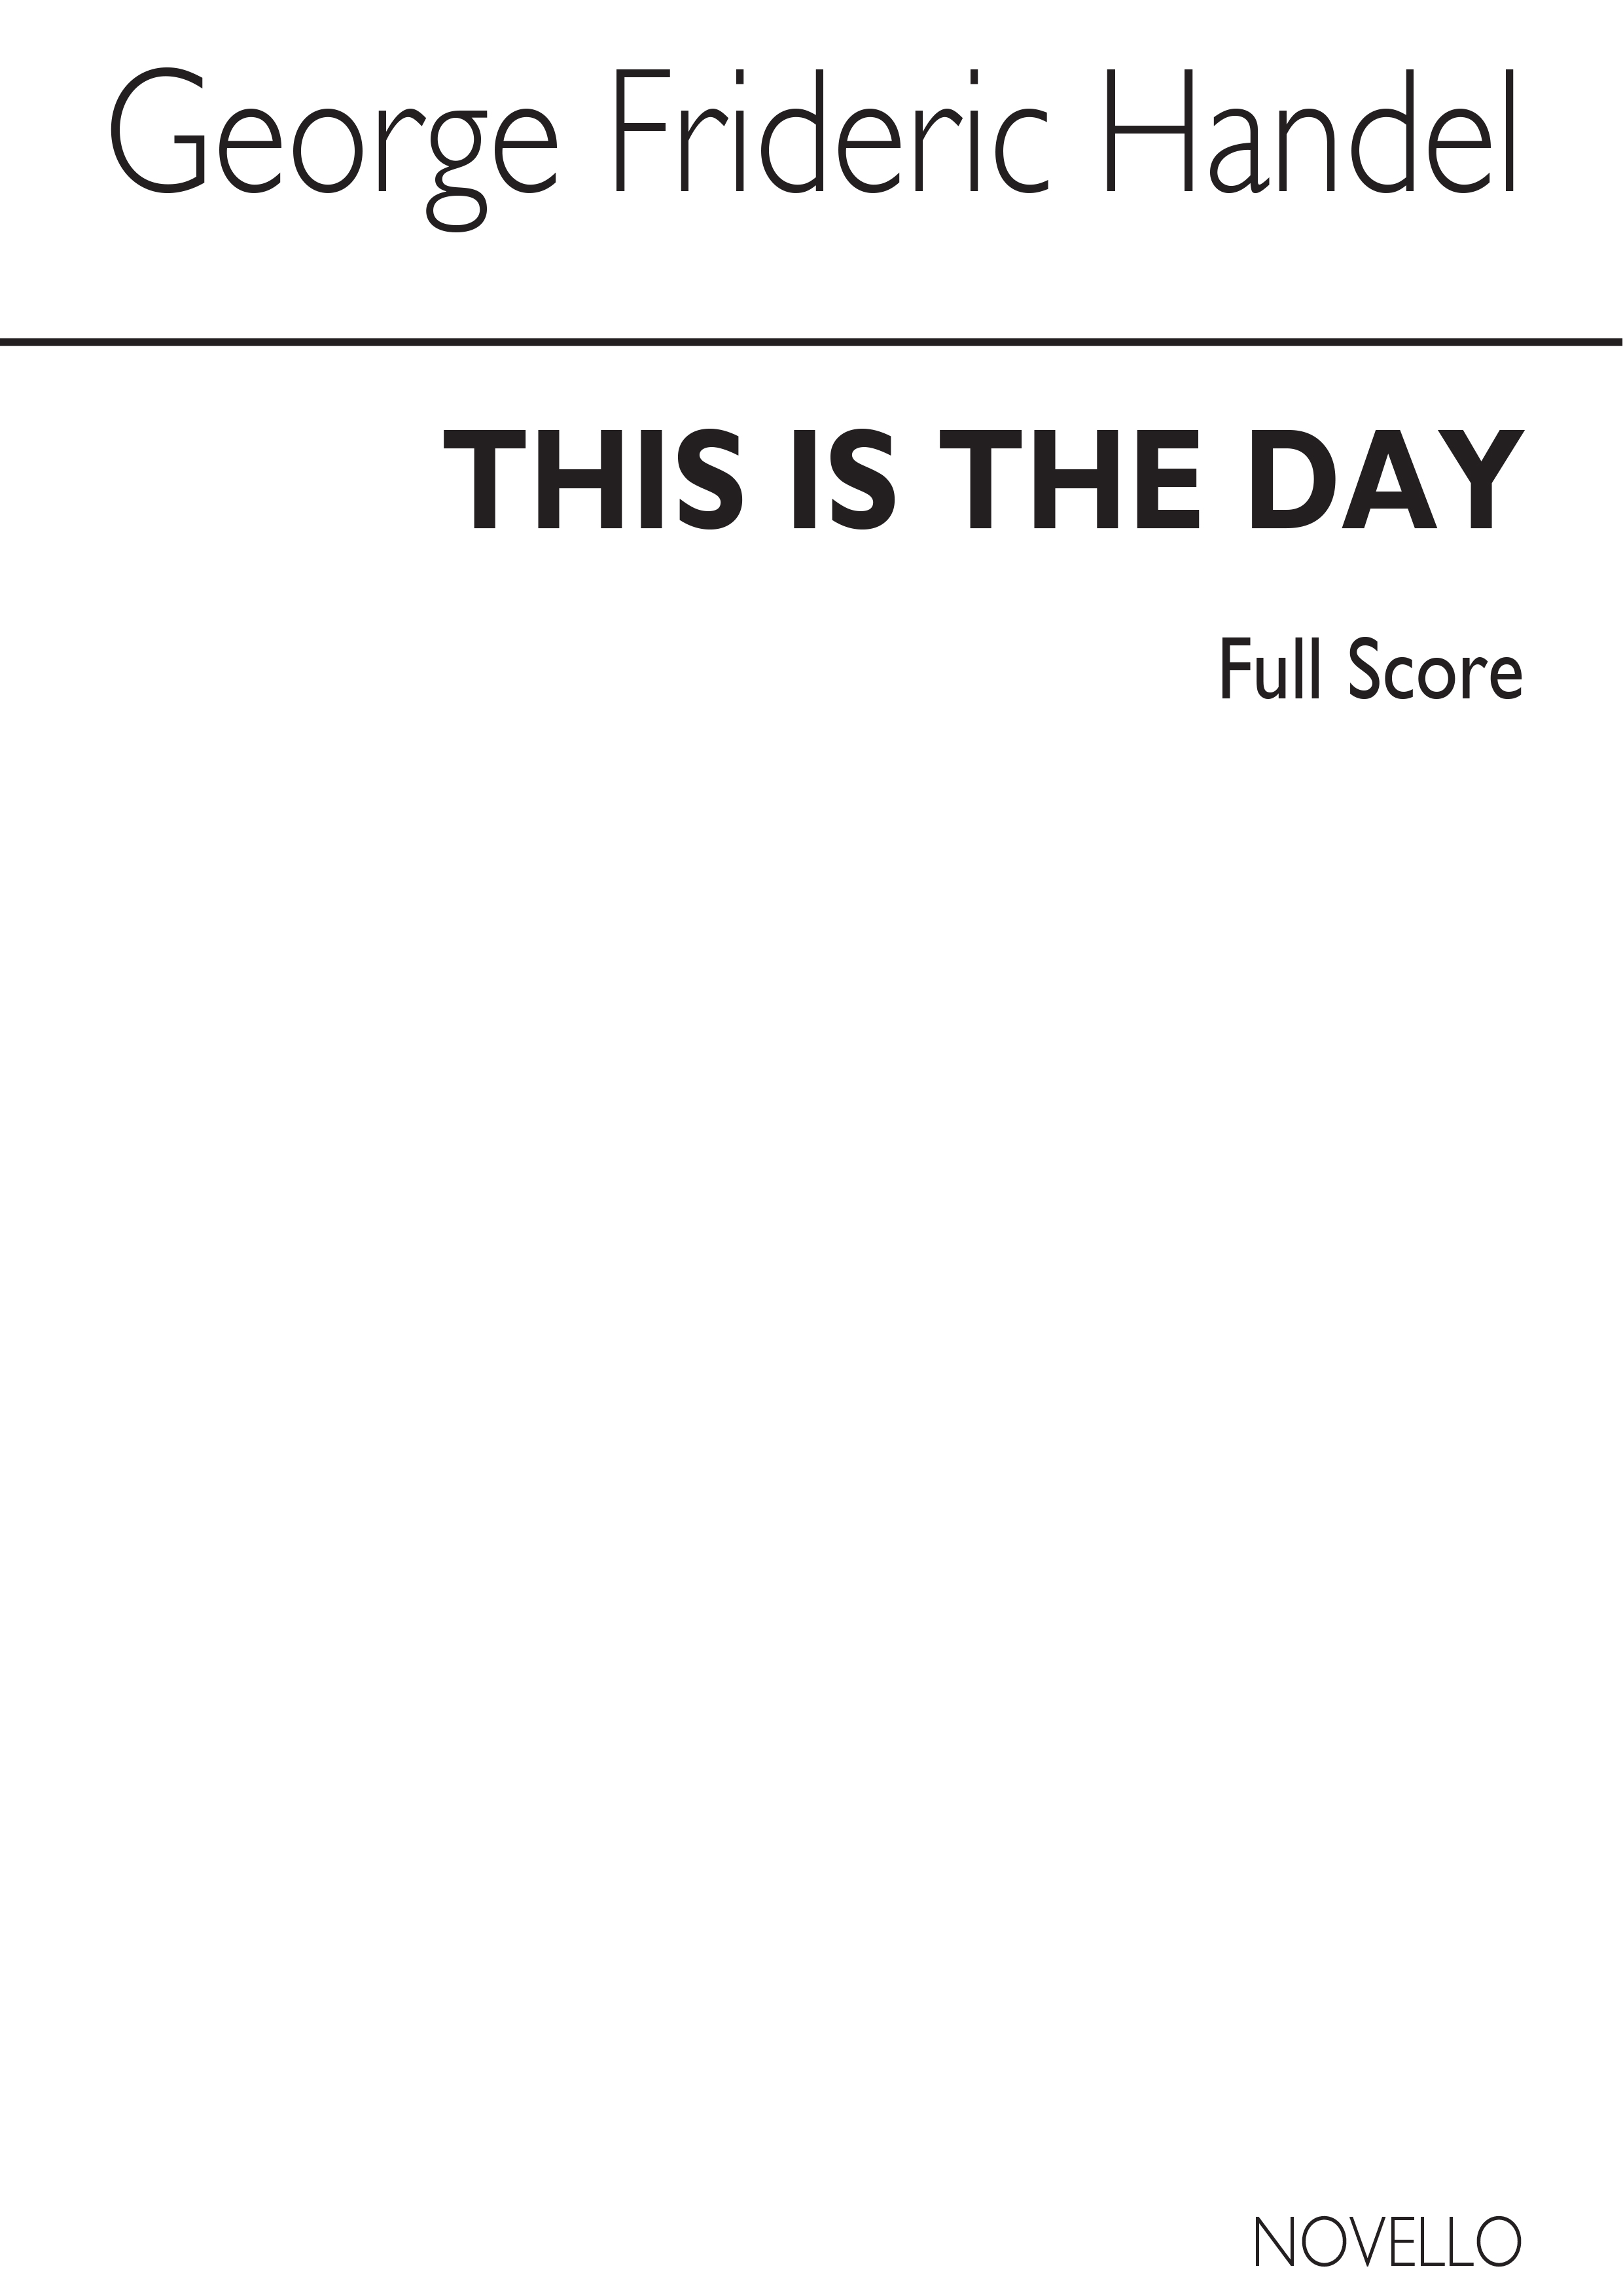 Georg Friedrich Hndel: This Is The Day (Ed. Burrows) Full Score: SATB: Score